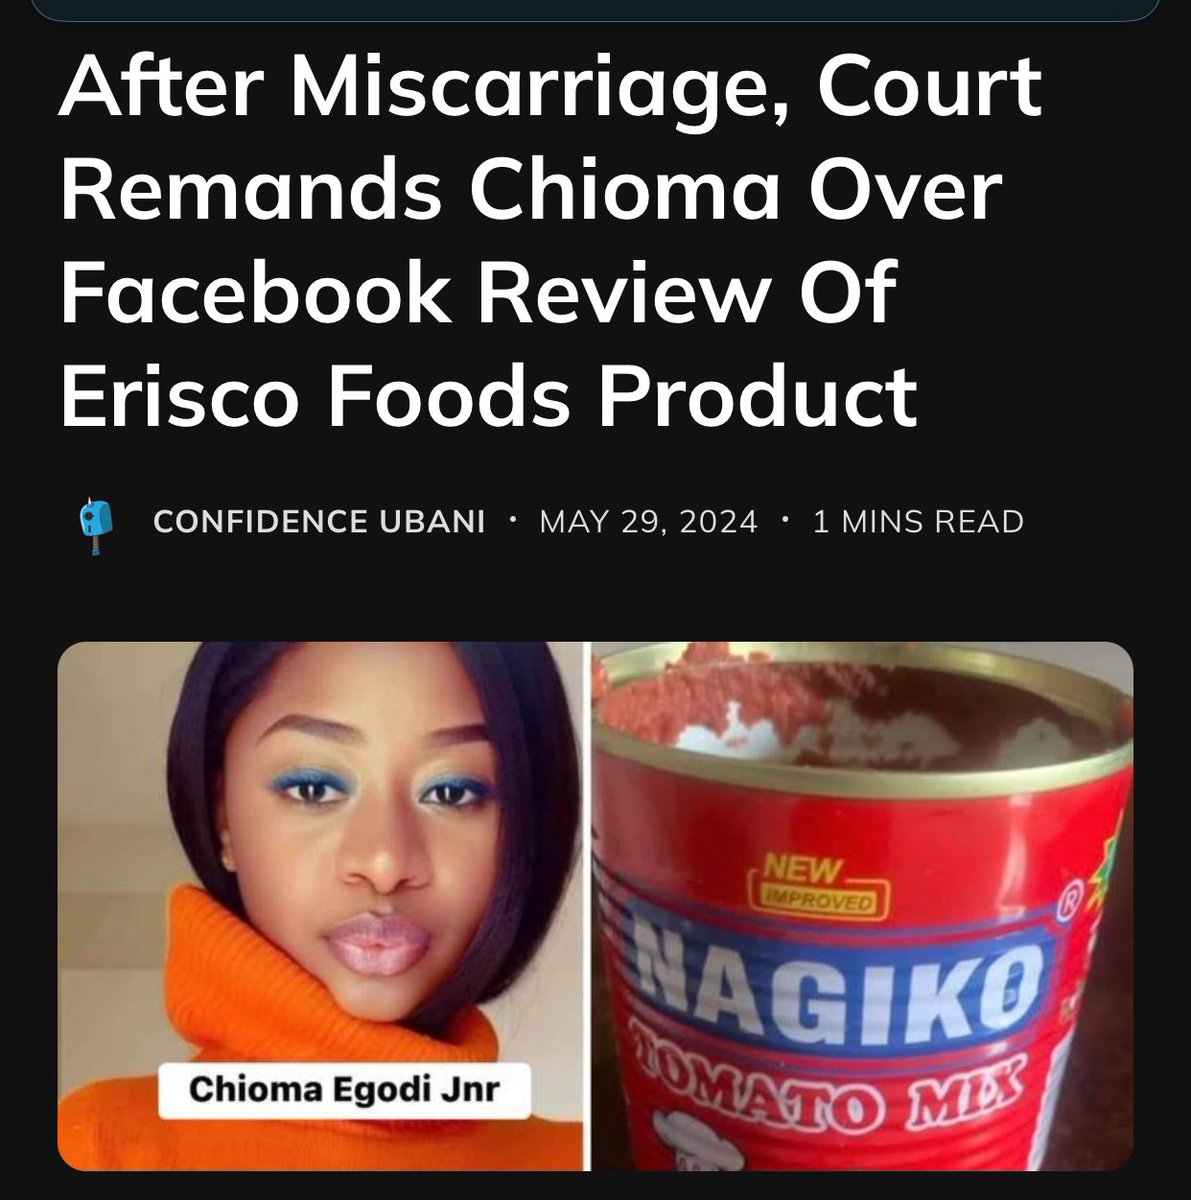 Outrageous! The Federal High Court's decision to remand Chioma Okoli for her Facebook comments on Erisco Foods' product is a blatant abuse of power. This move undermines freedom of speech and shows the judiciary and police in a shameful light. Justice Peter Lifu, do better!